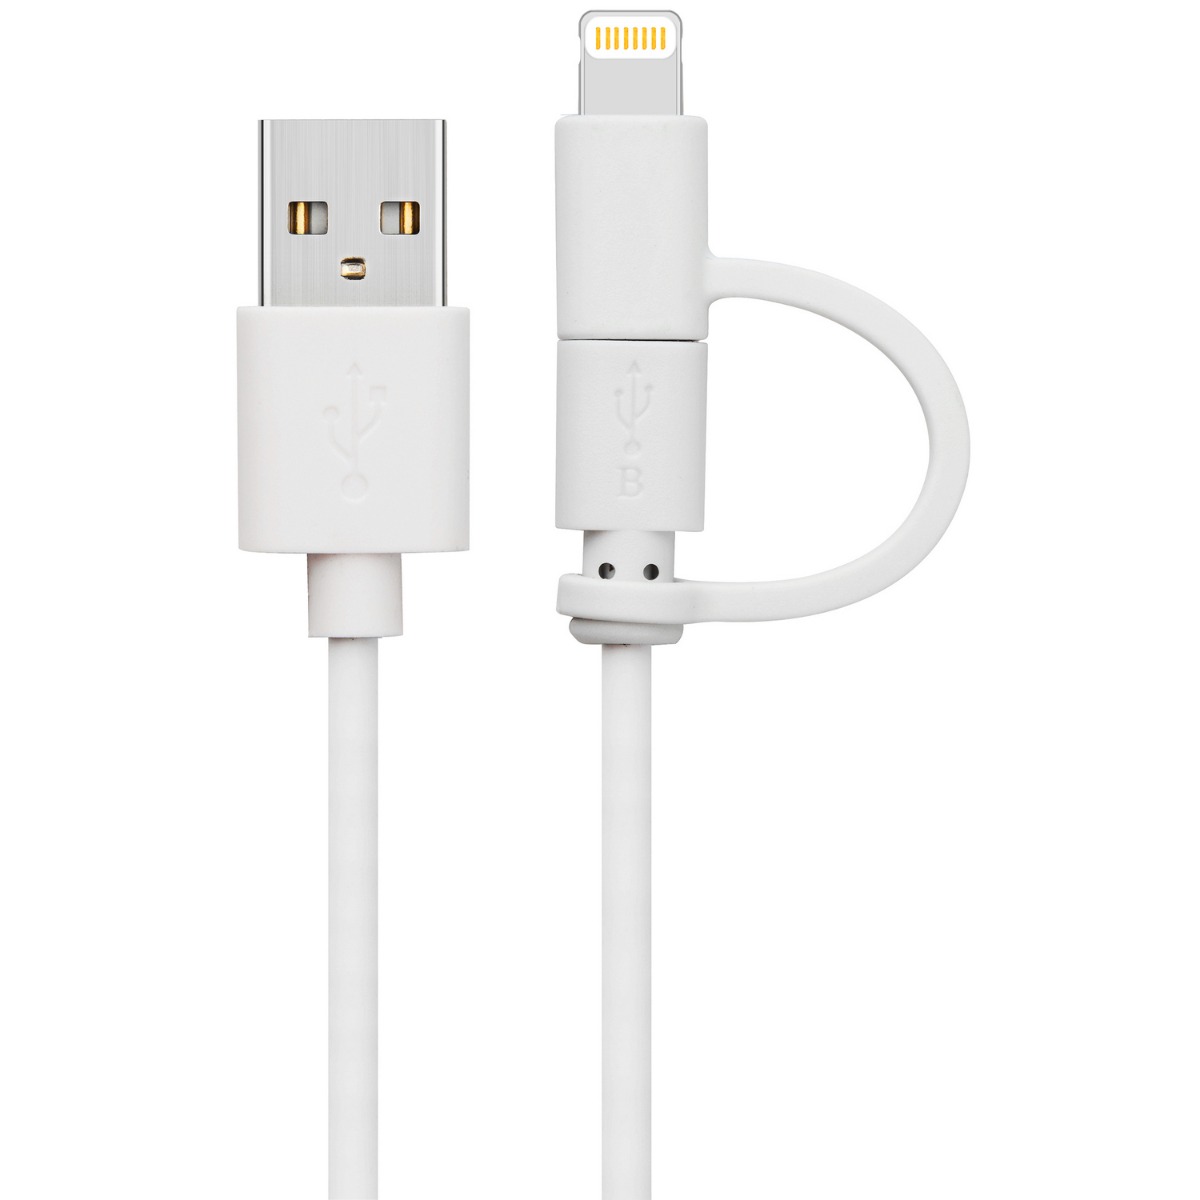 2 in 1 POSS Micro USB + Lightning Cable